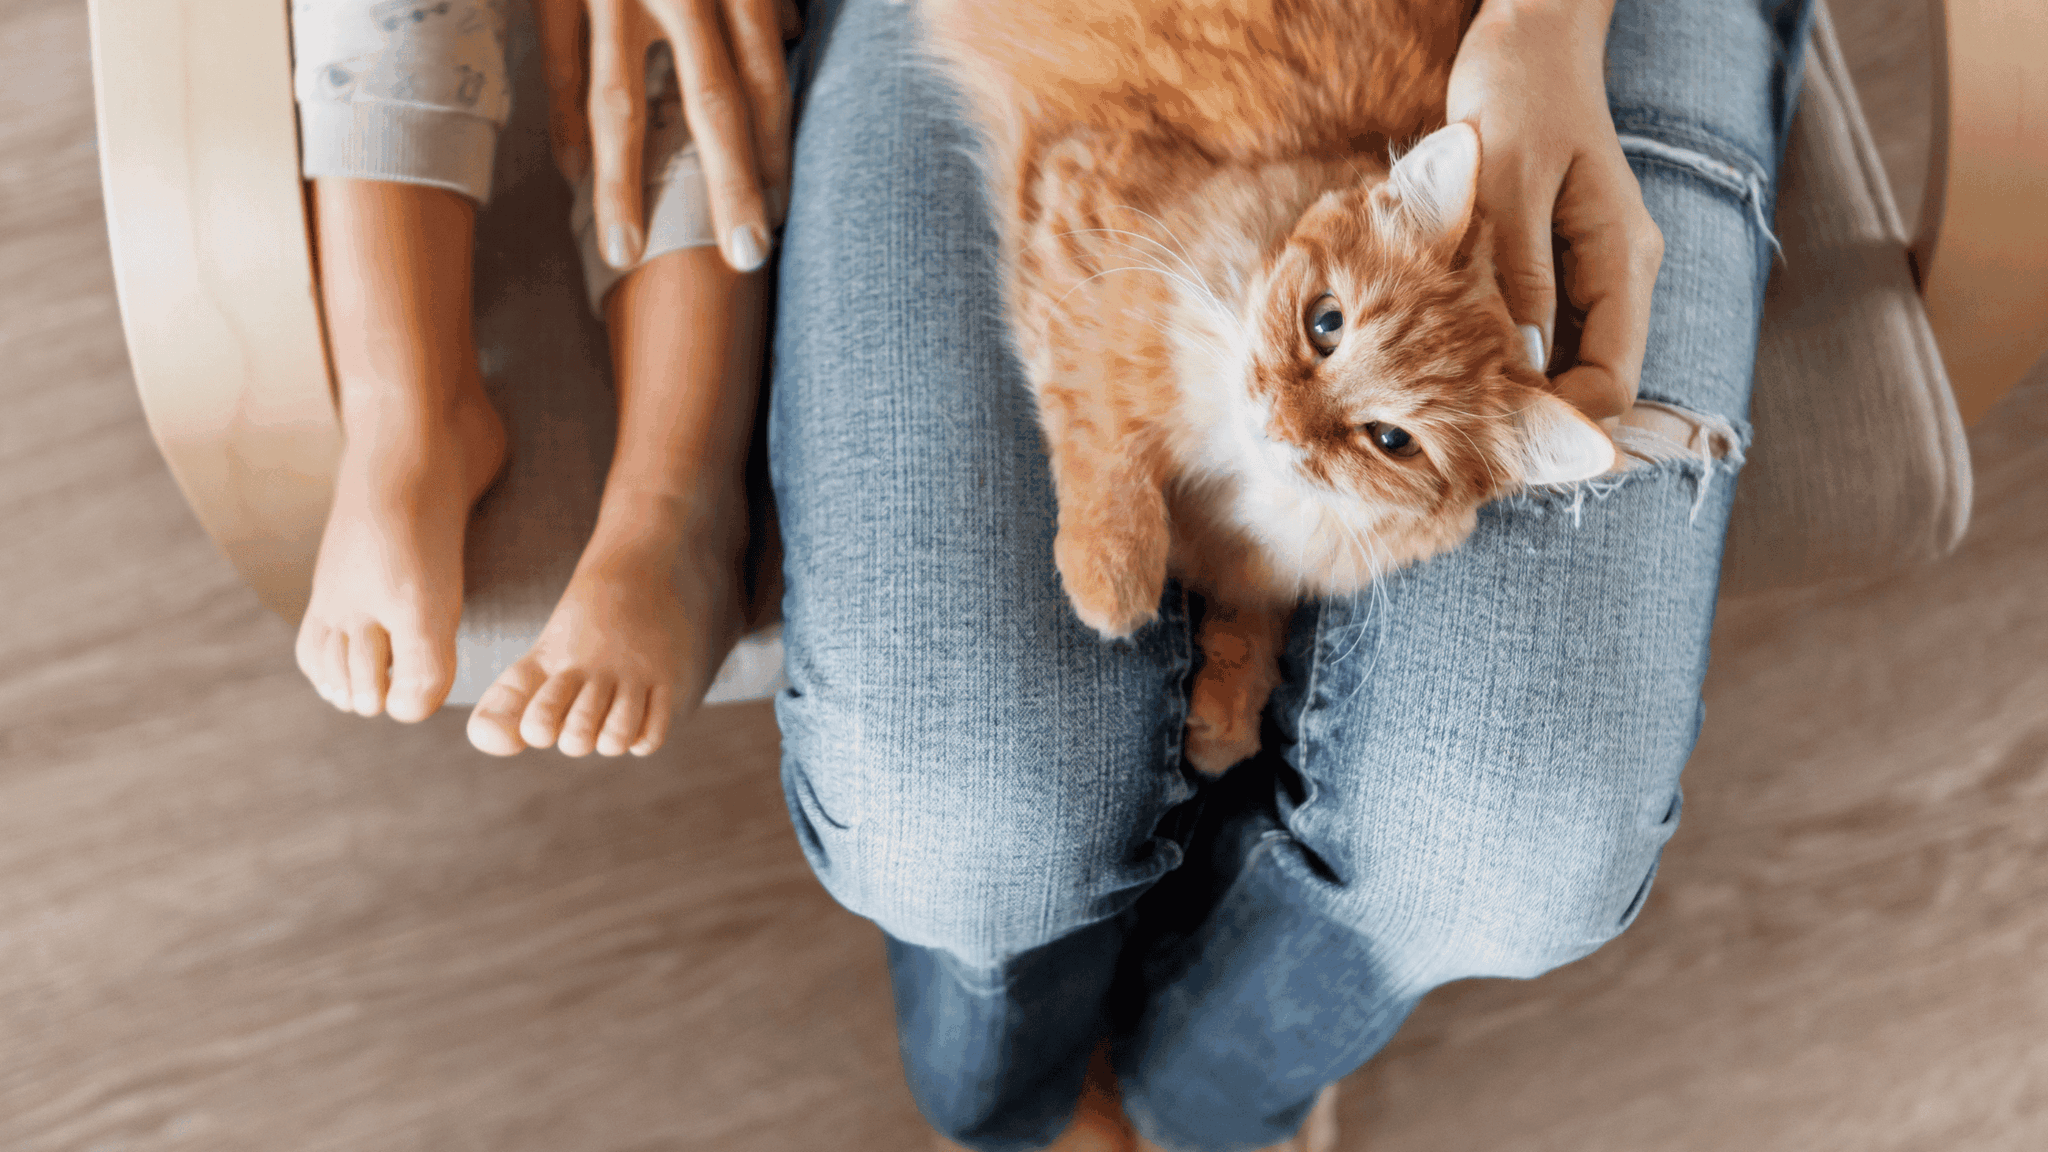 How To Get Cat to Trust You in 5 Steps - Cover Photo